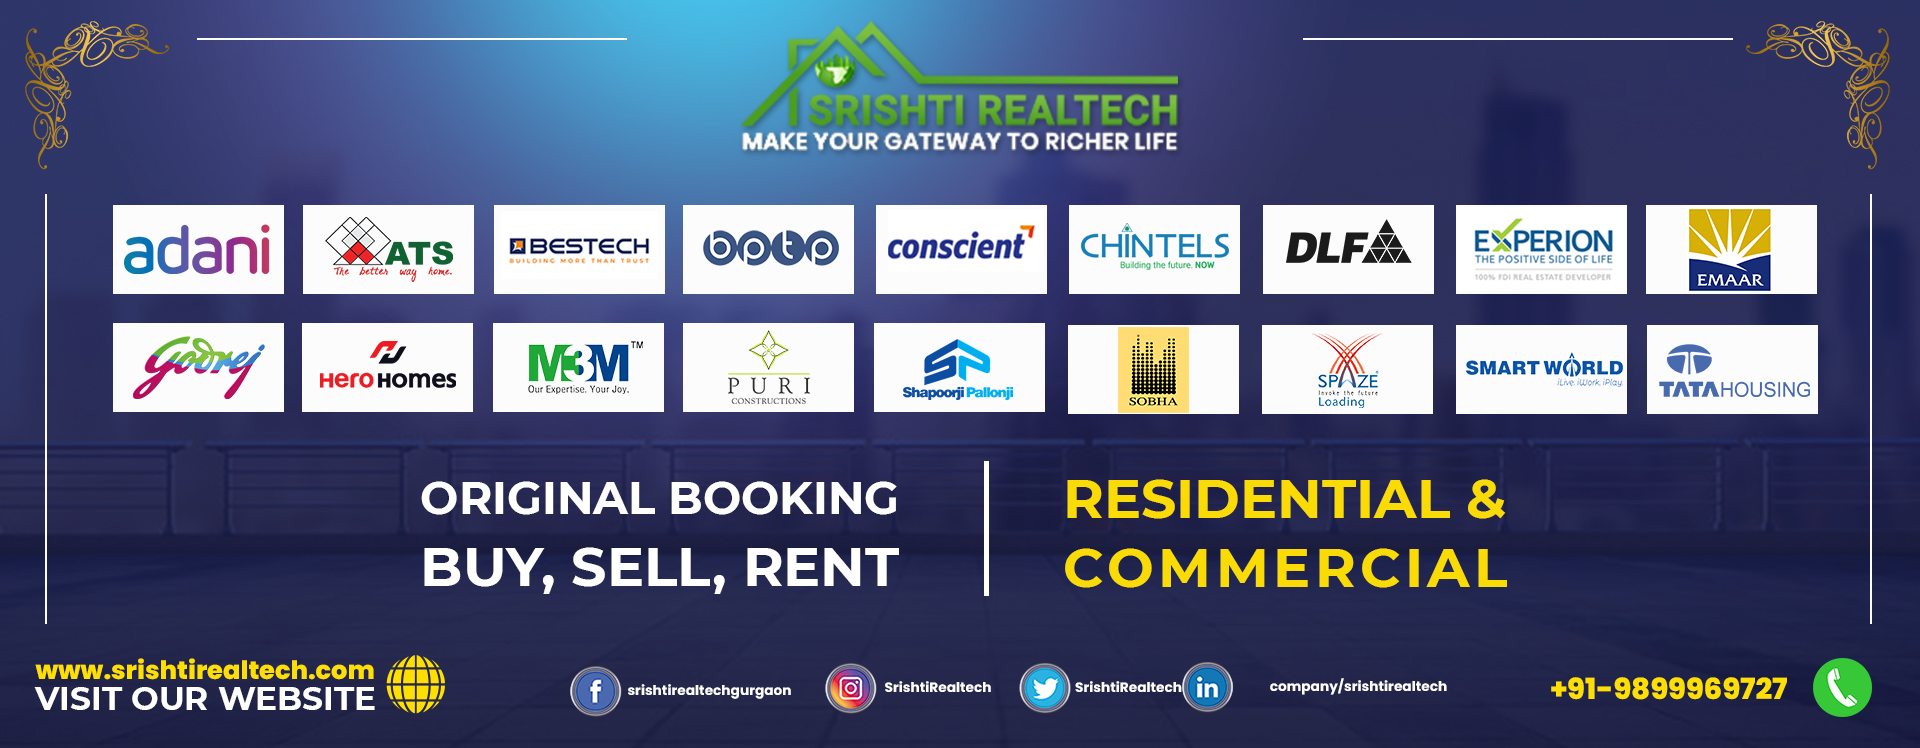 Srishti Realtech offers Best Flats in Gurgaon for Sale Cover Image